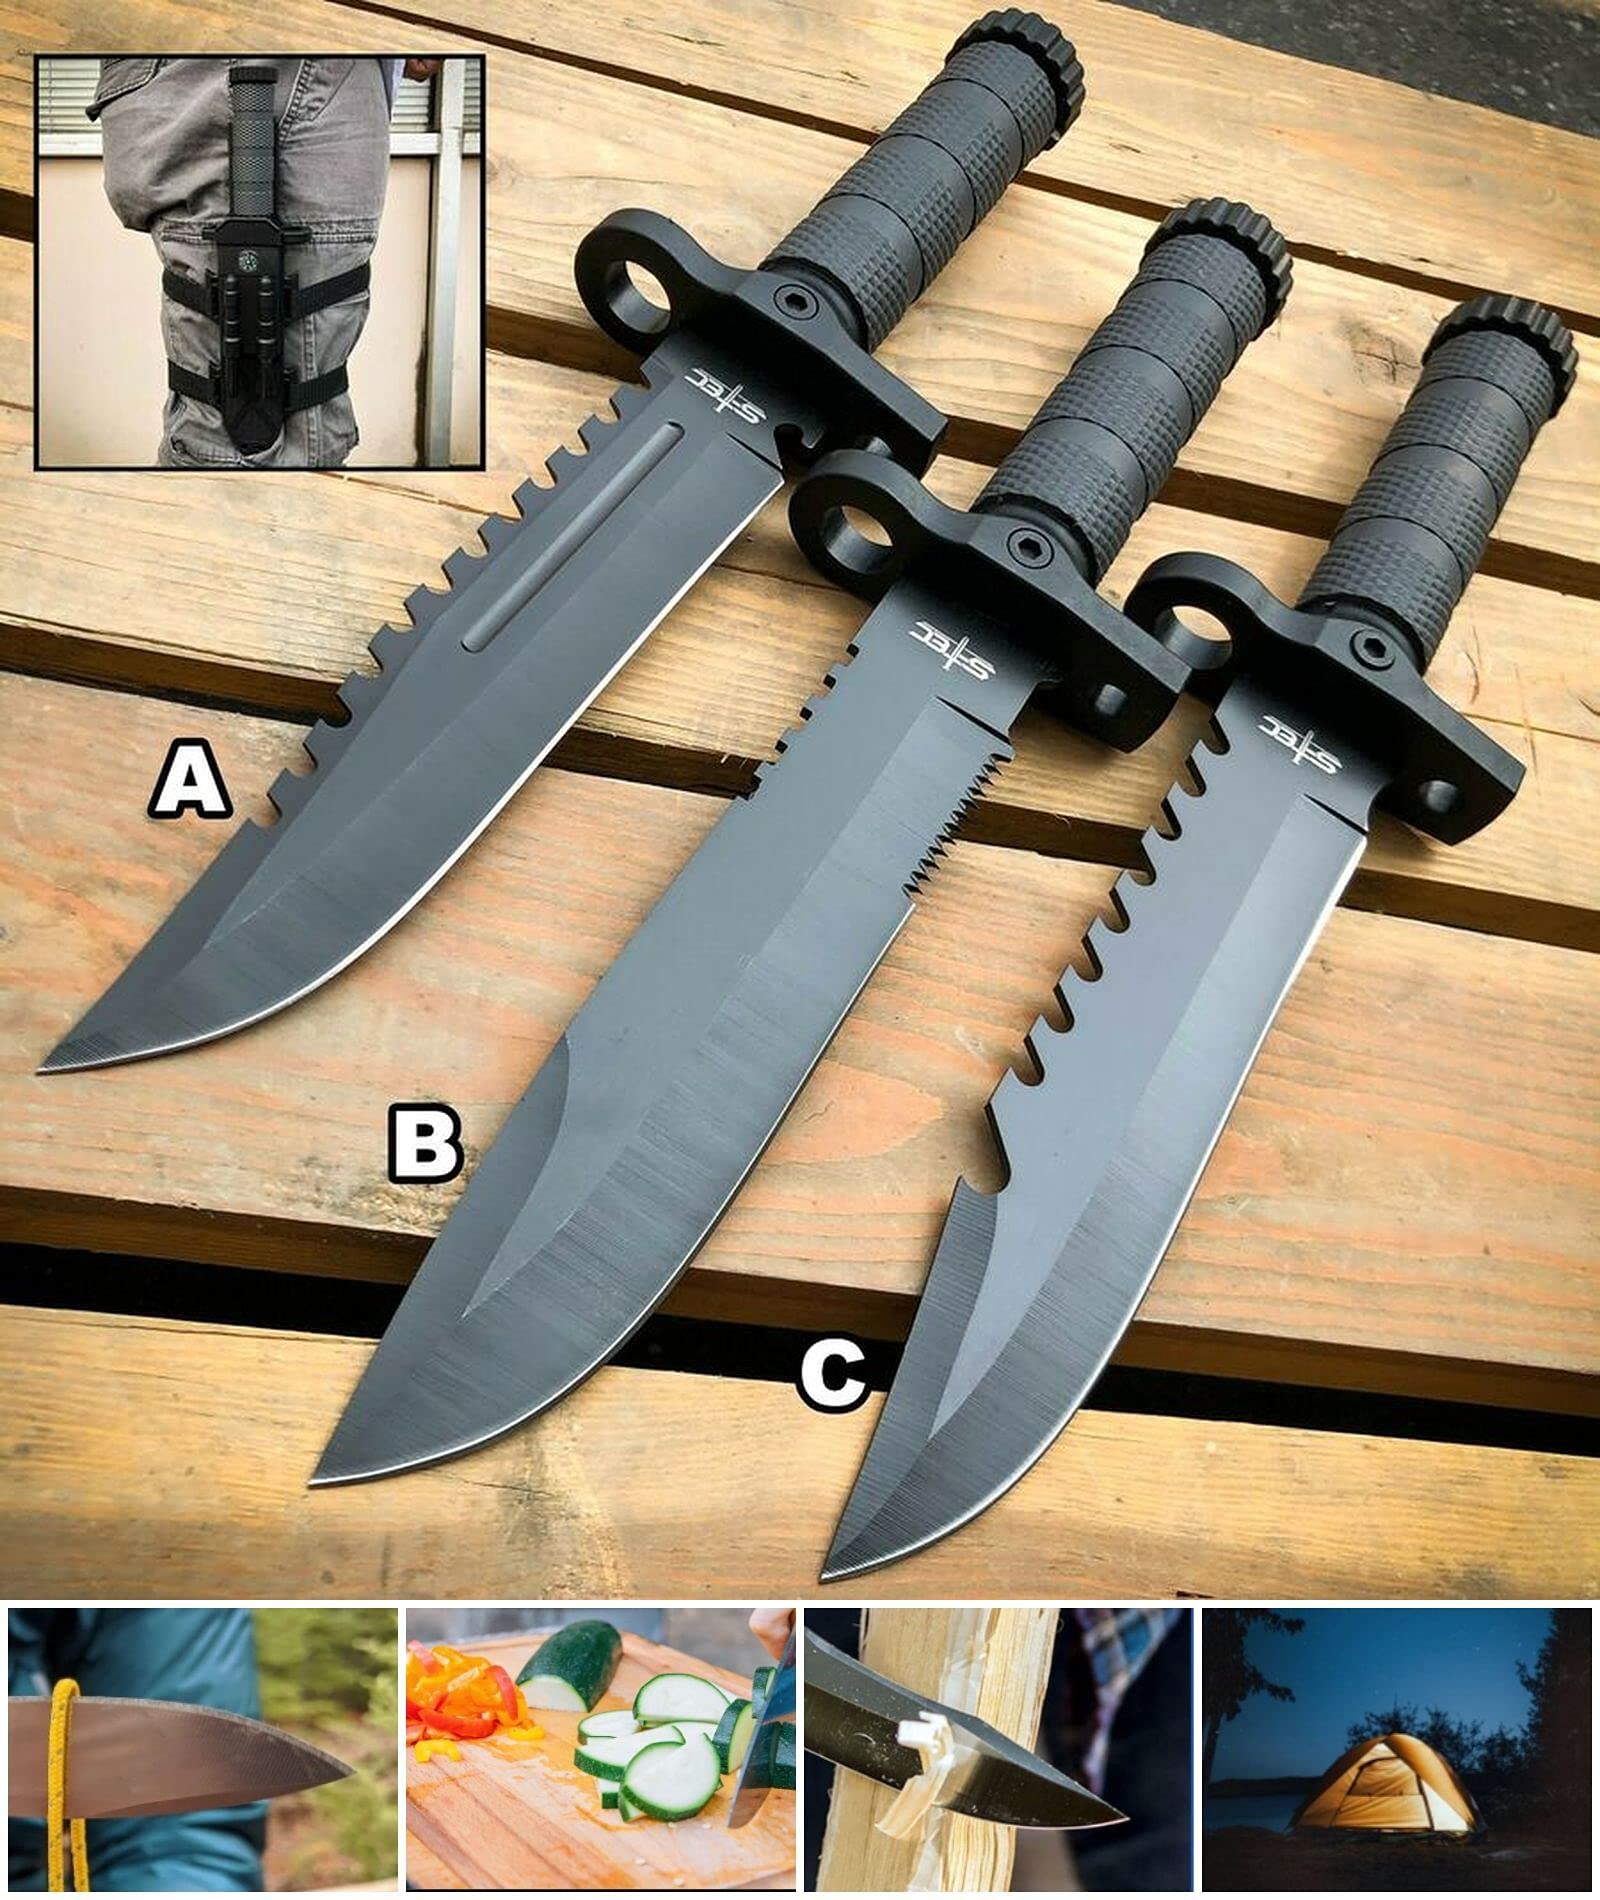 S.S. Fixed Knives 12.5'' Hunting Fixed Blade Army Survival Knife W Fire Starter C - Green by Survival Steel